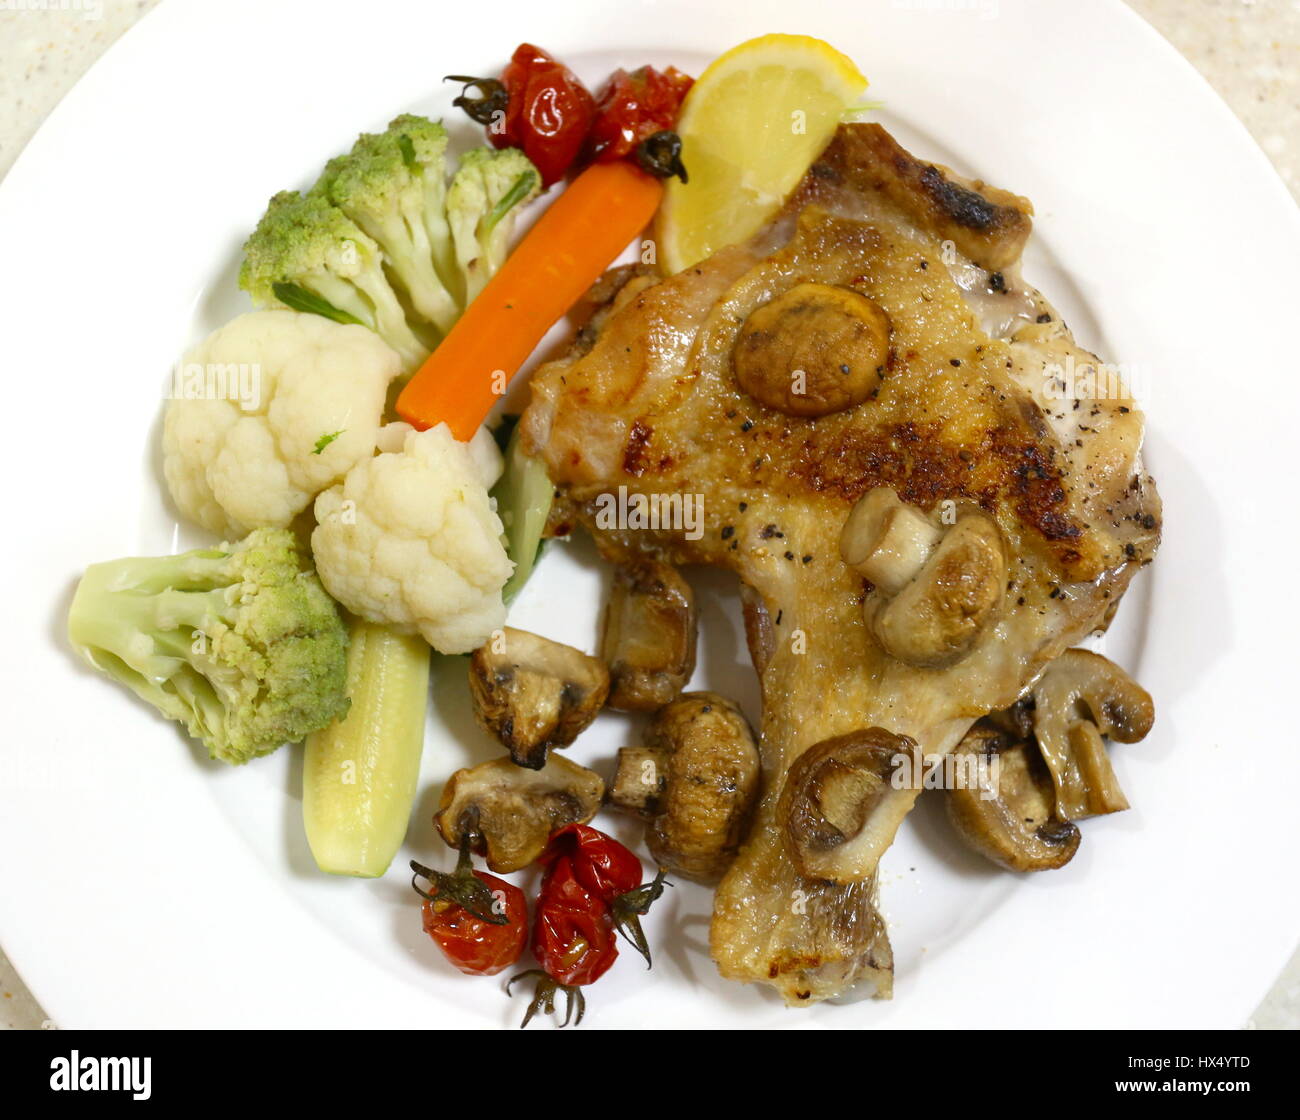 Oven grilled chicken leg and mushrooms, served with steamed cauliflower, courgette,carrot, cherry tomatoes and romanesco broccoli. Stock Photo